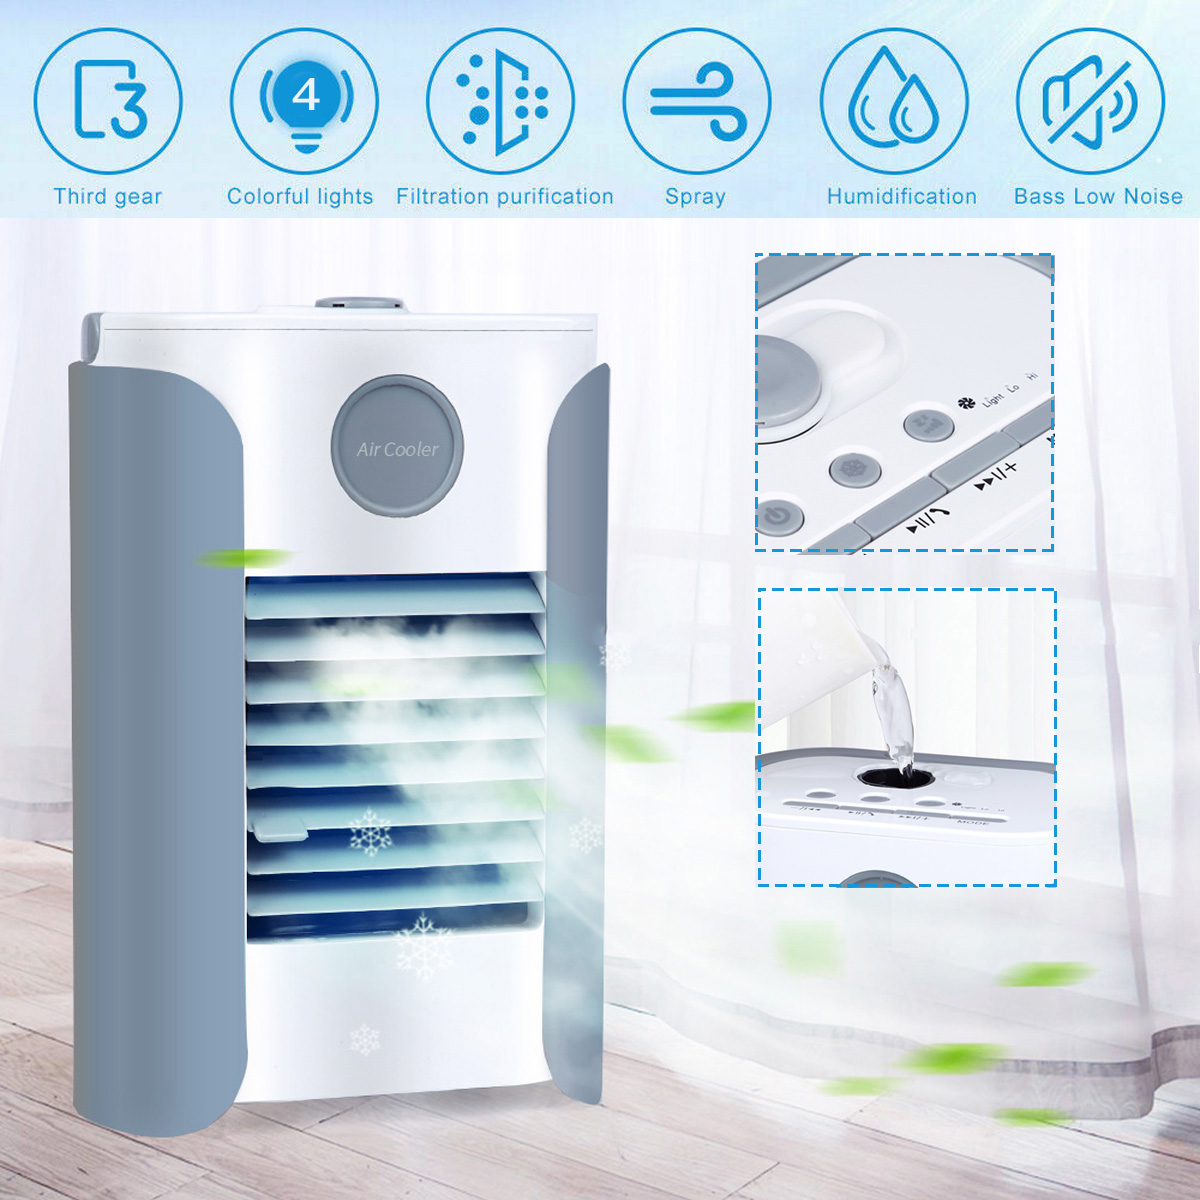 USB-Multifunction-Humidifier-Portable-Air-Conditioner-Fan-Cooling-bluetooth-Speaker-Gifts-for-Family-1675300-3